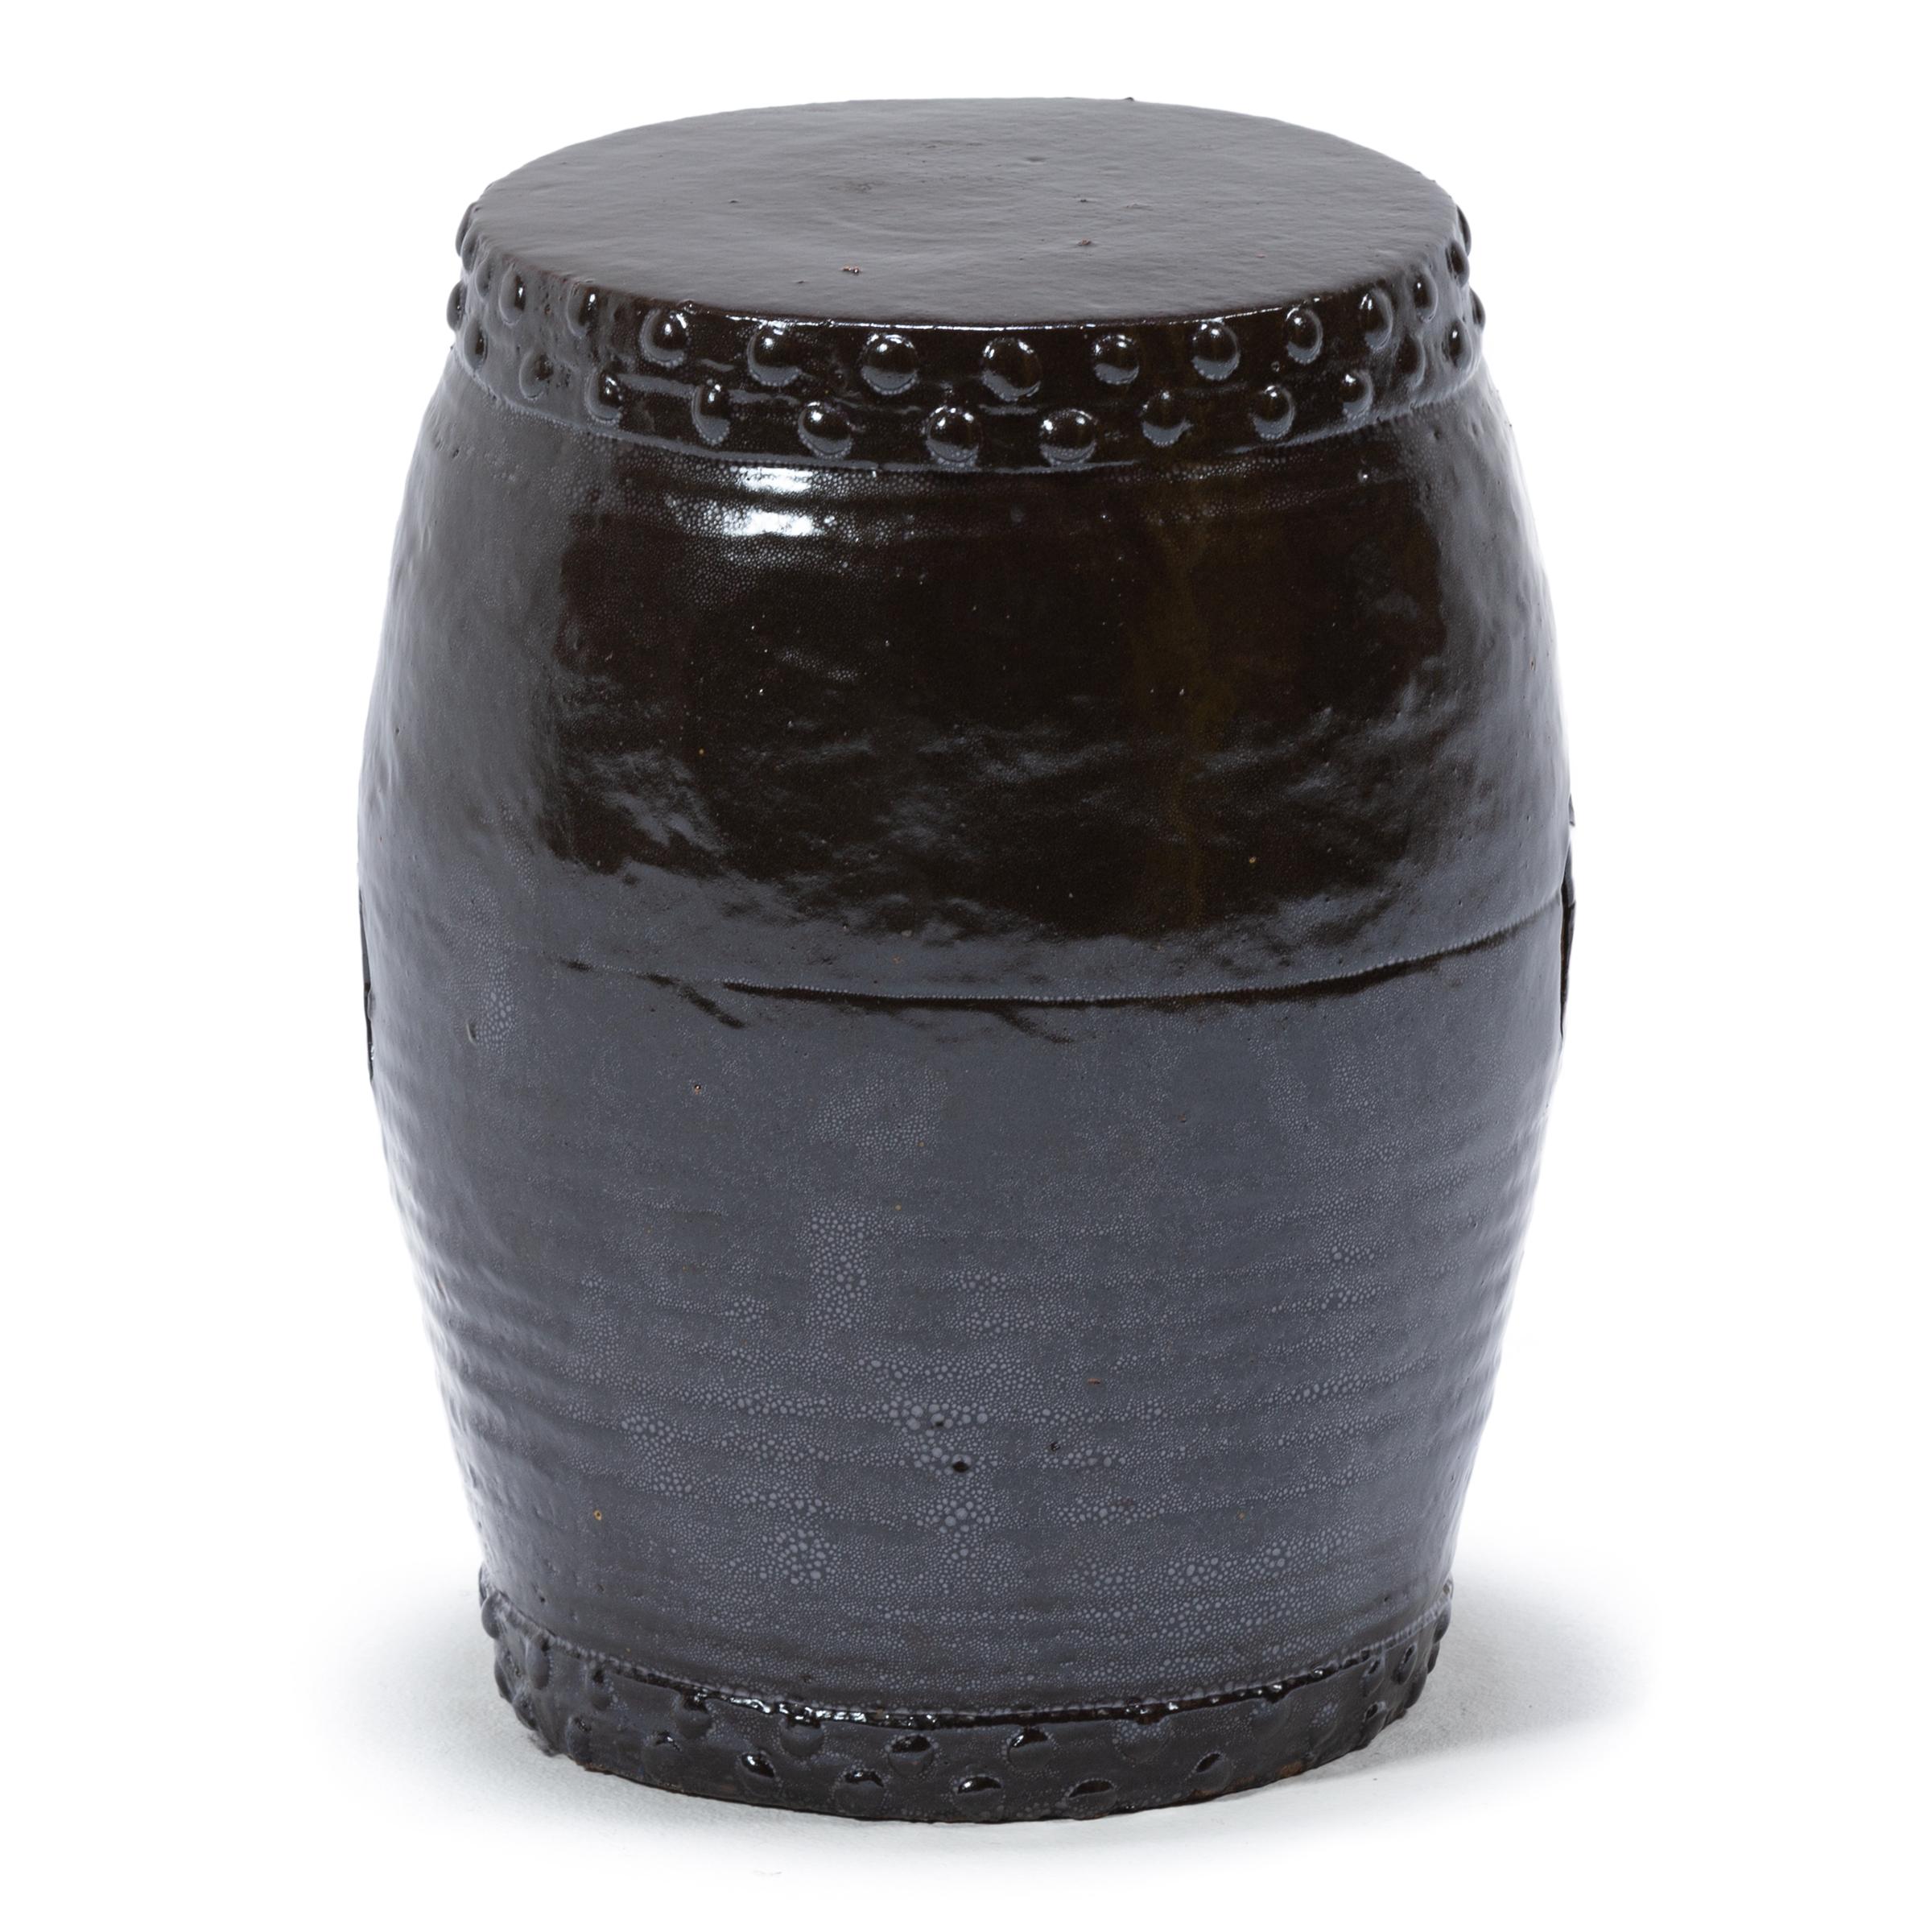 This early 20th century garden stool from China's Zhejiang province keeps with tradition with its simple drum-form shape, cloaked in a dark brown glaze. Ringing both the top and bottom, a pattern of boss-head nails imitates those used to stretch a